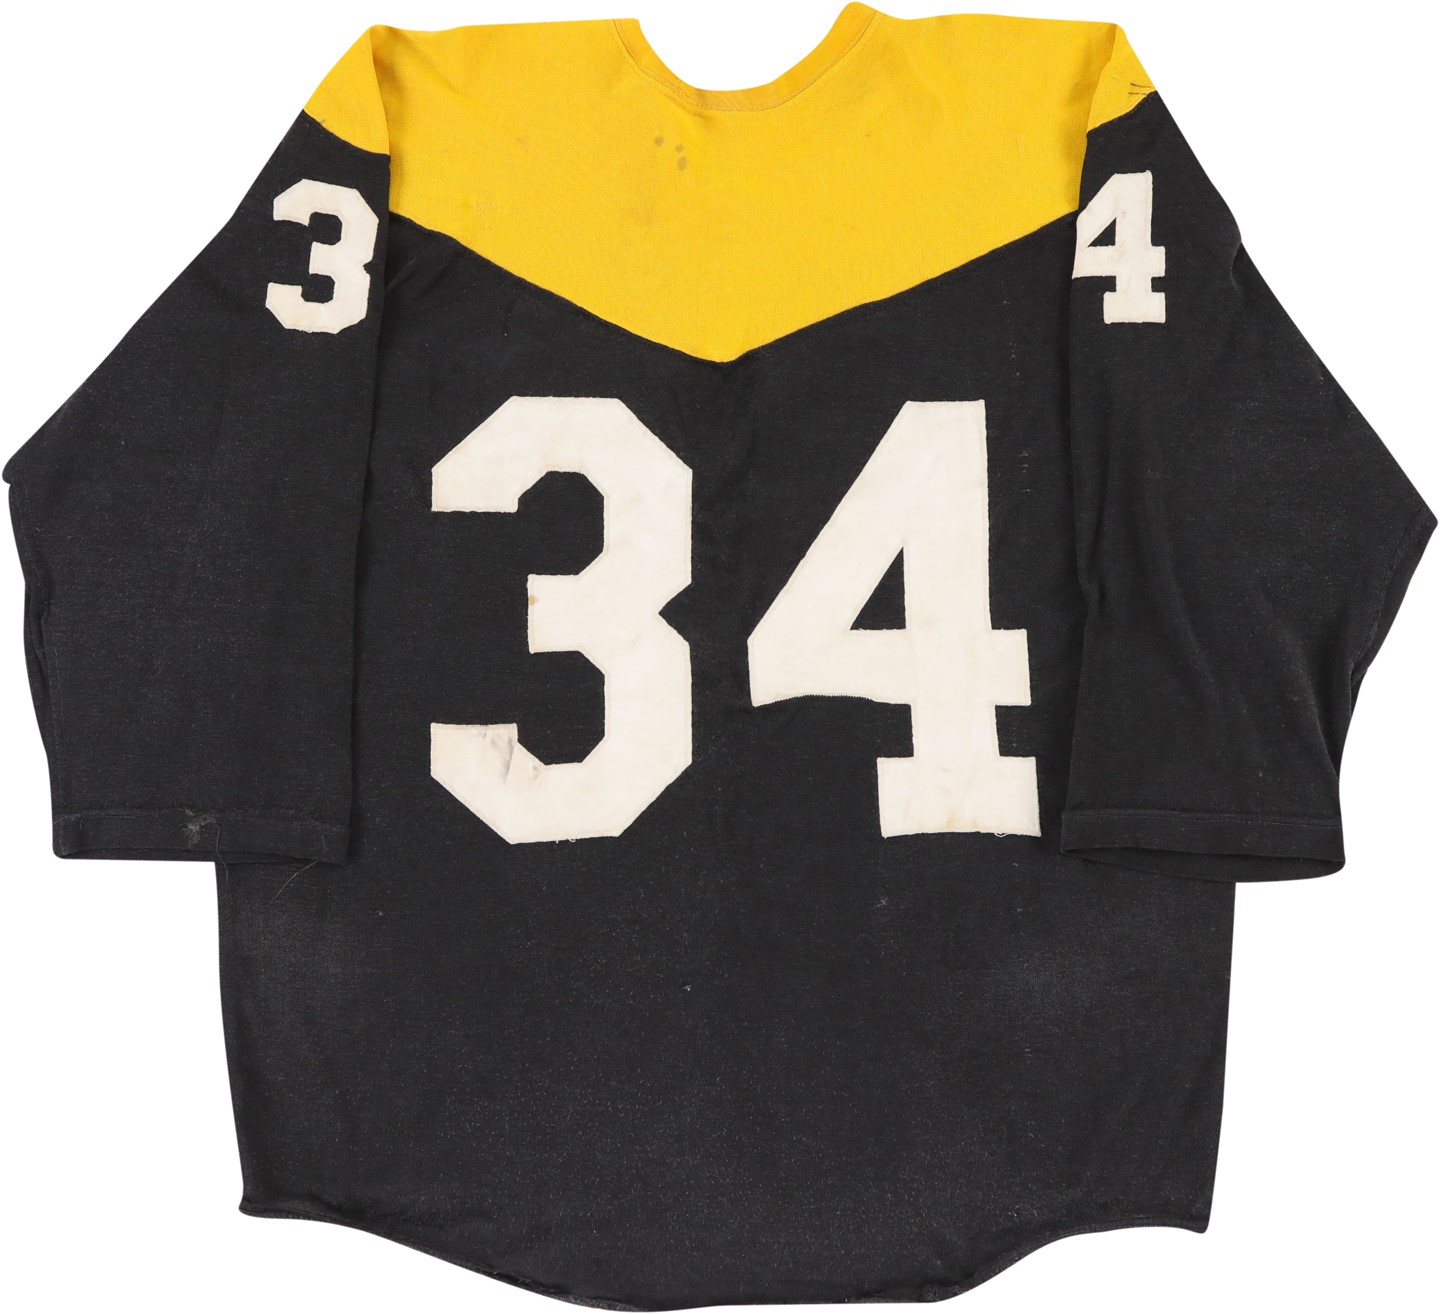 - 1966-1967 Andy Russell Pittsburgh Steelers Game Worn Jersey - Rare "Batman" Style